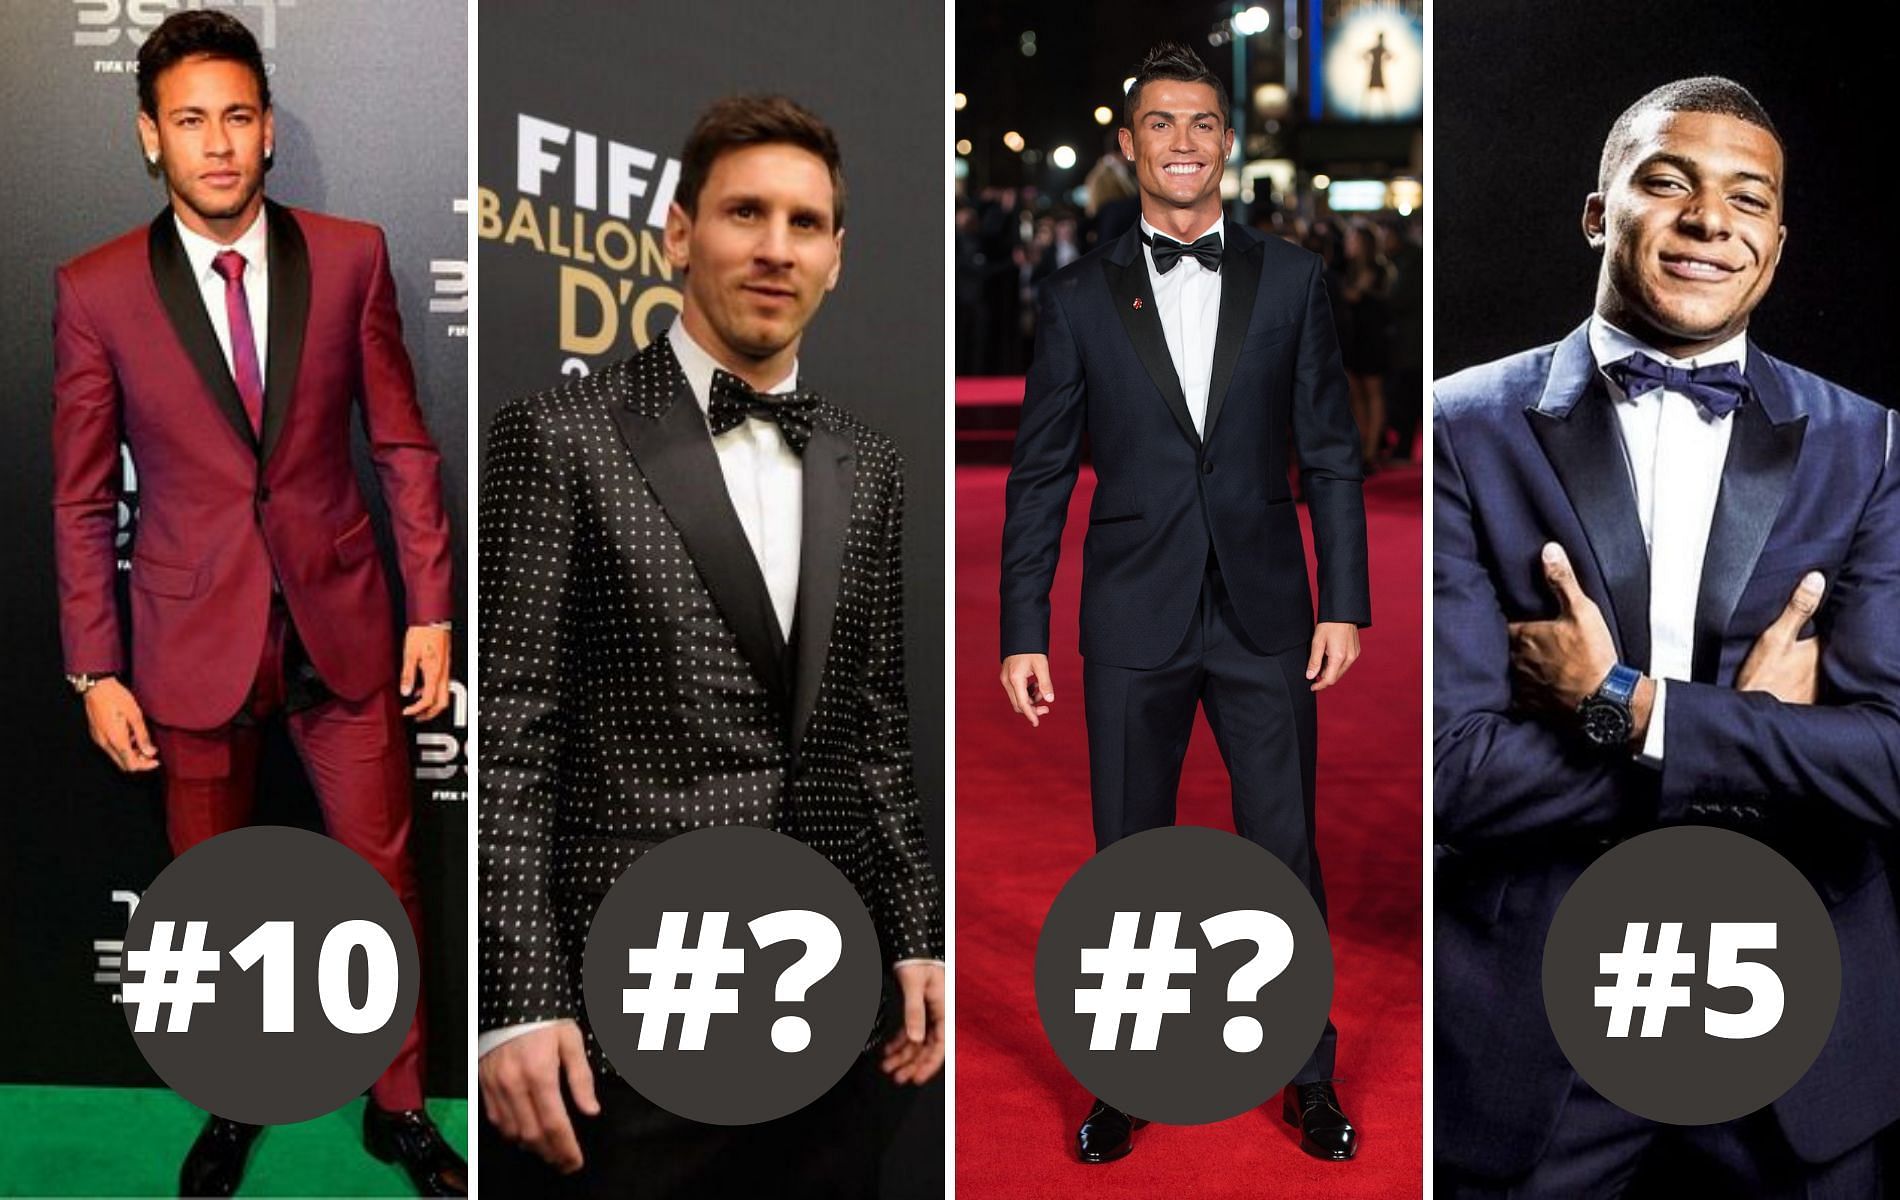 Who is the most popular footballer in the world right now?